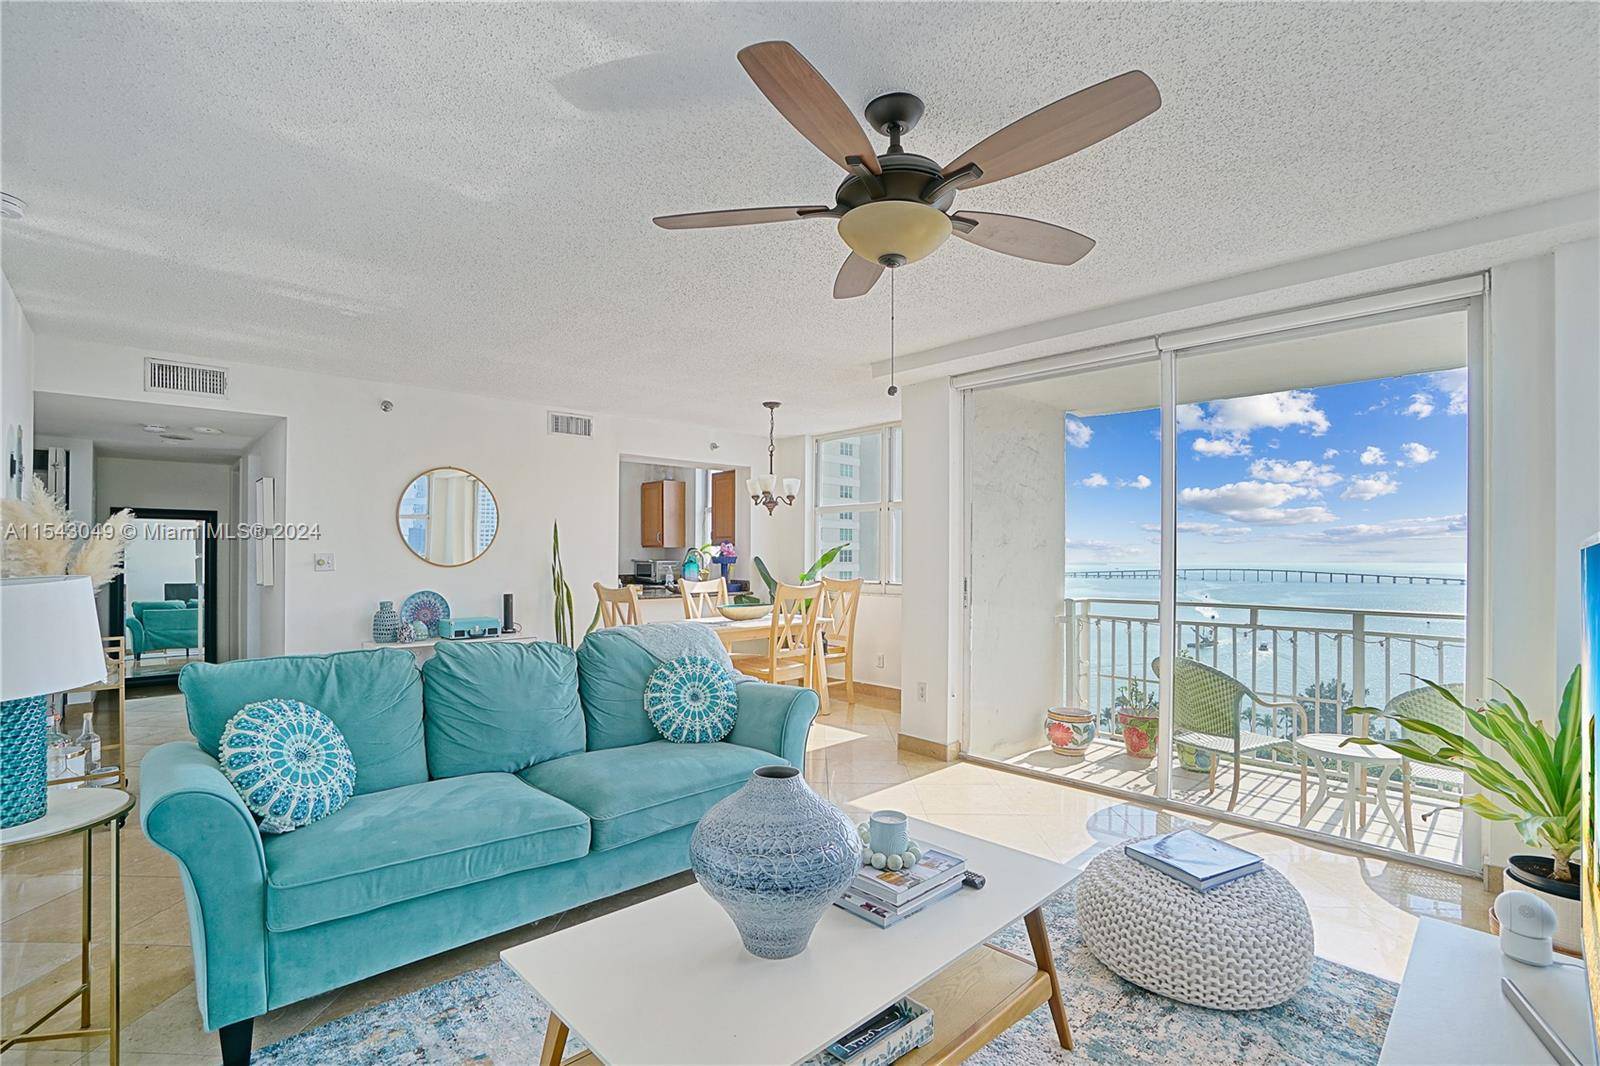 Views ! This bright and spacious 2 Bedroom 2 Bathroom split plan corner unit with balcony has both beautiful intracoastal views of Biscayne Bay and gorgeous city views of Brickell's ...